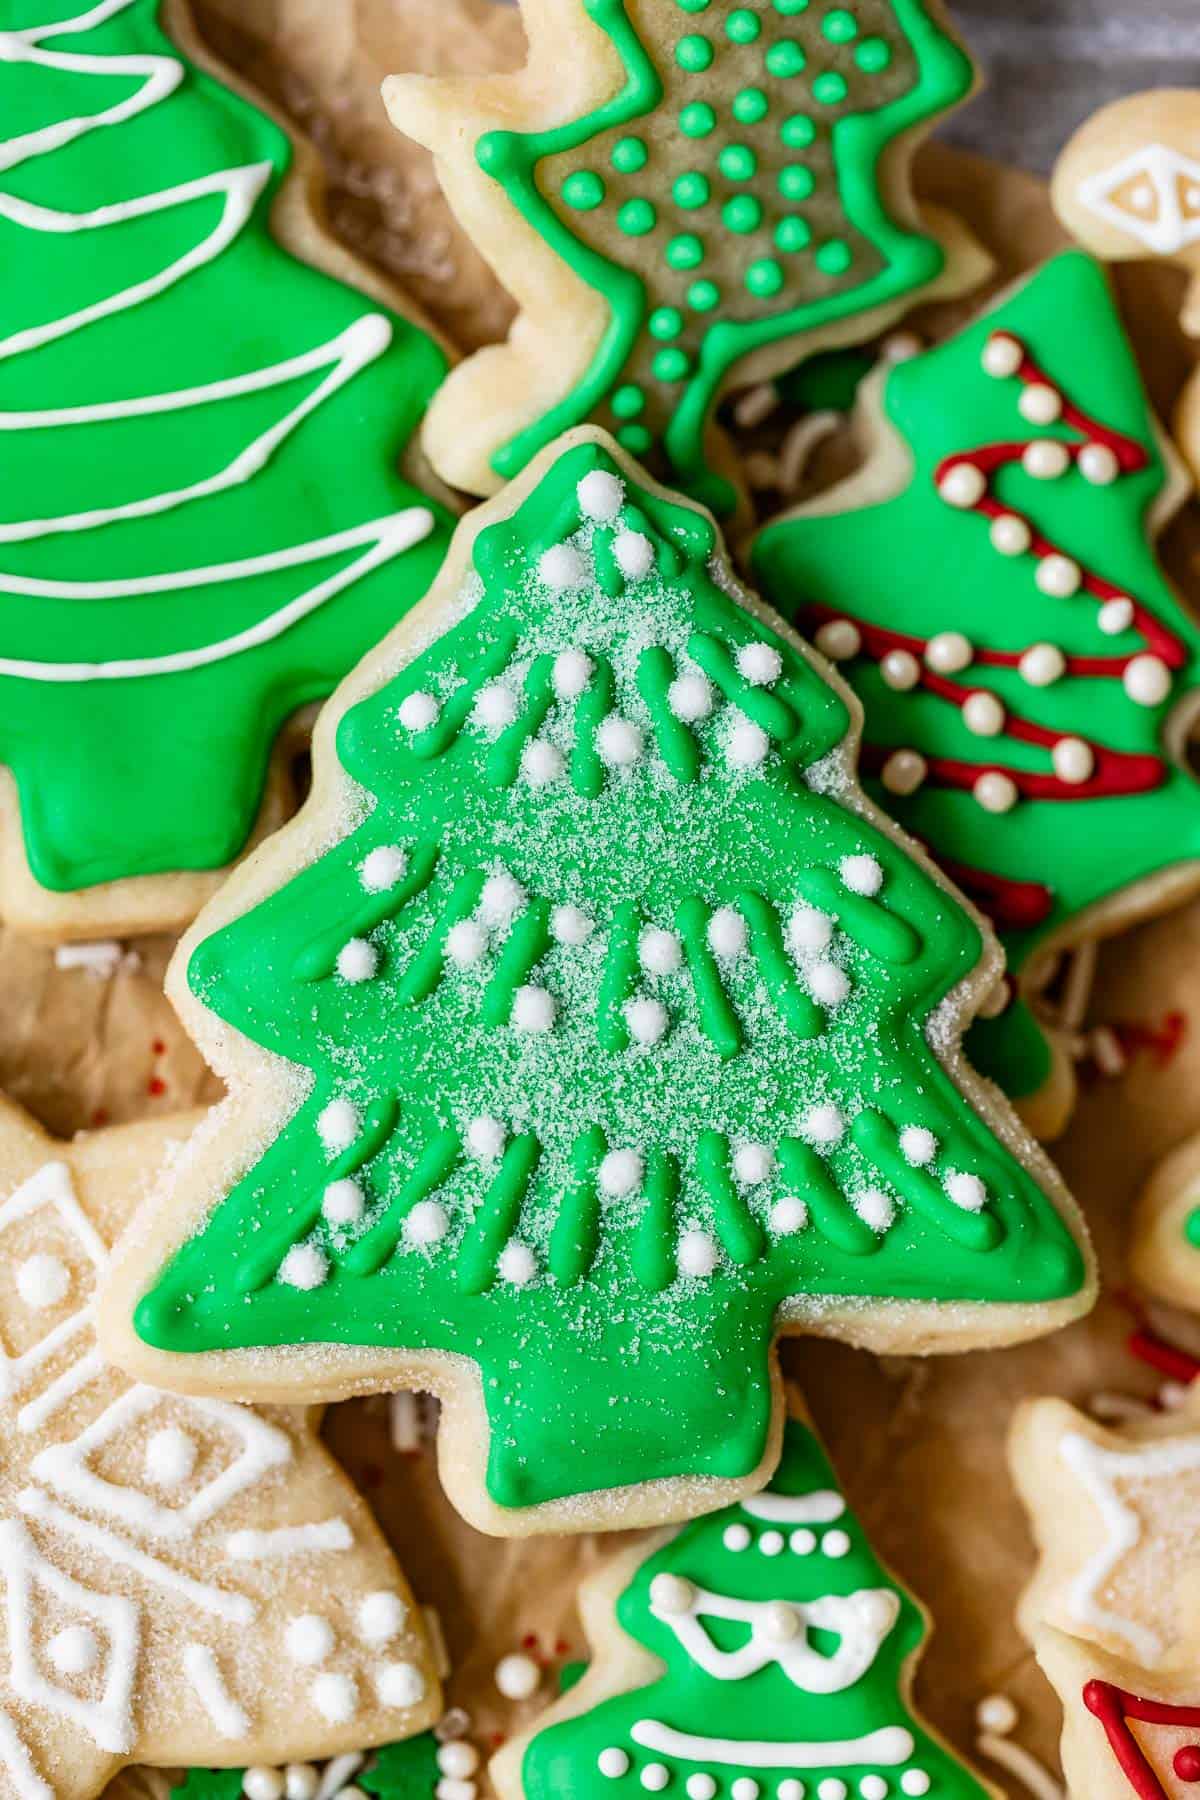 Christmas sugar cookies with royal icing designs including green frosting and sugar snow.